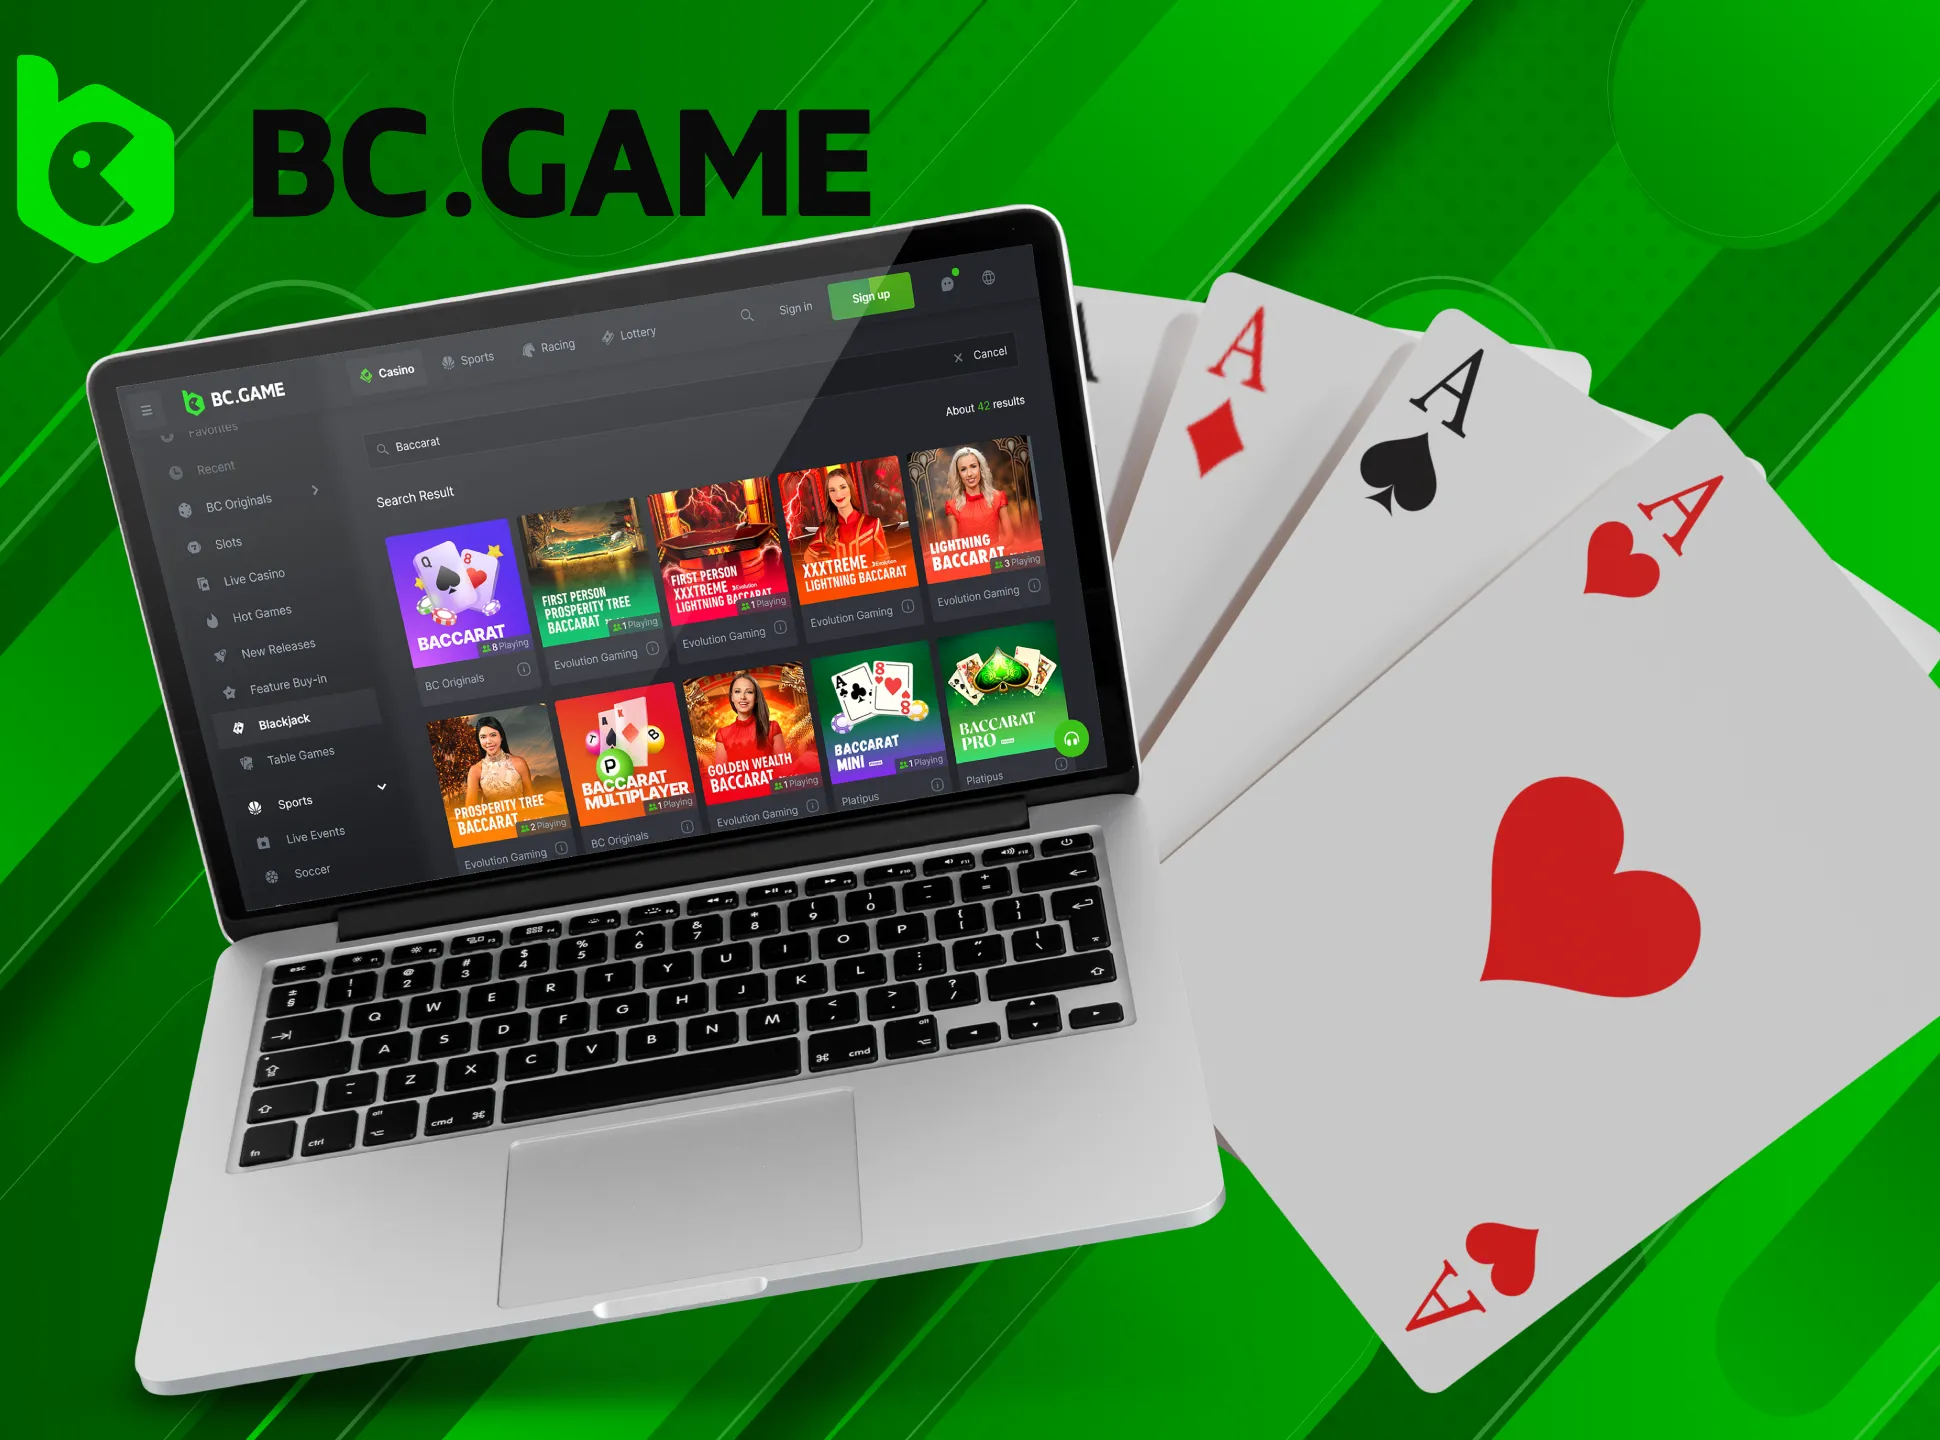 Collect the best card combinations to win in BC Game's Baccarat game.